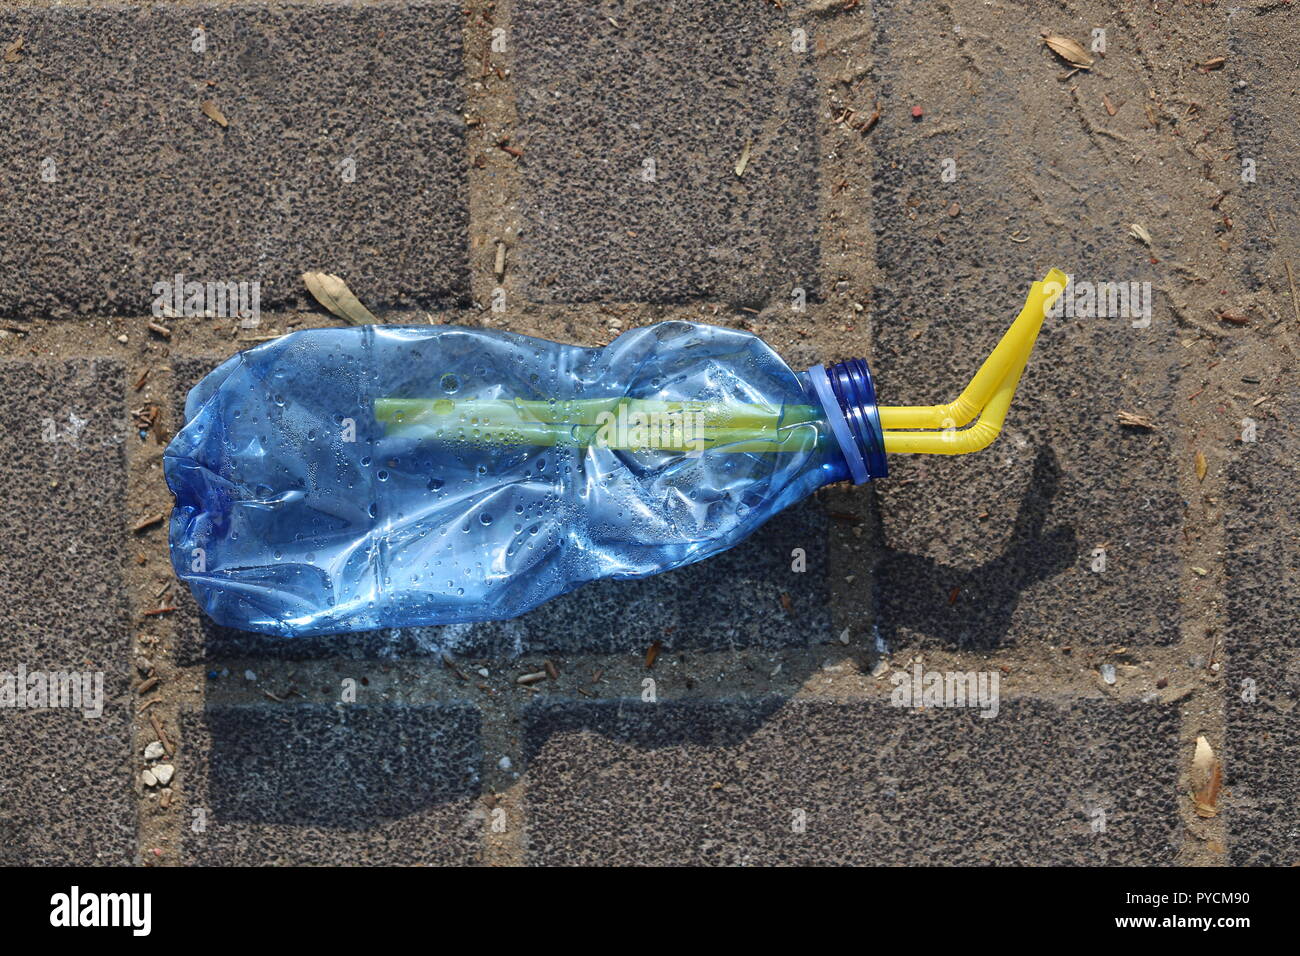 Crushed Plastic Bottle on the Sidewalk. Blue squeezed plastic bottle with two drinking straws inside, on the pavement. Disposable bottle thrown away. Stock Photo